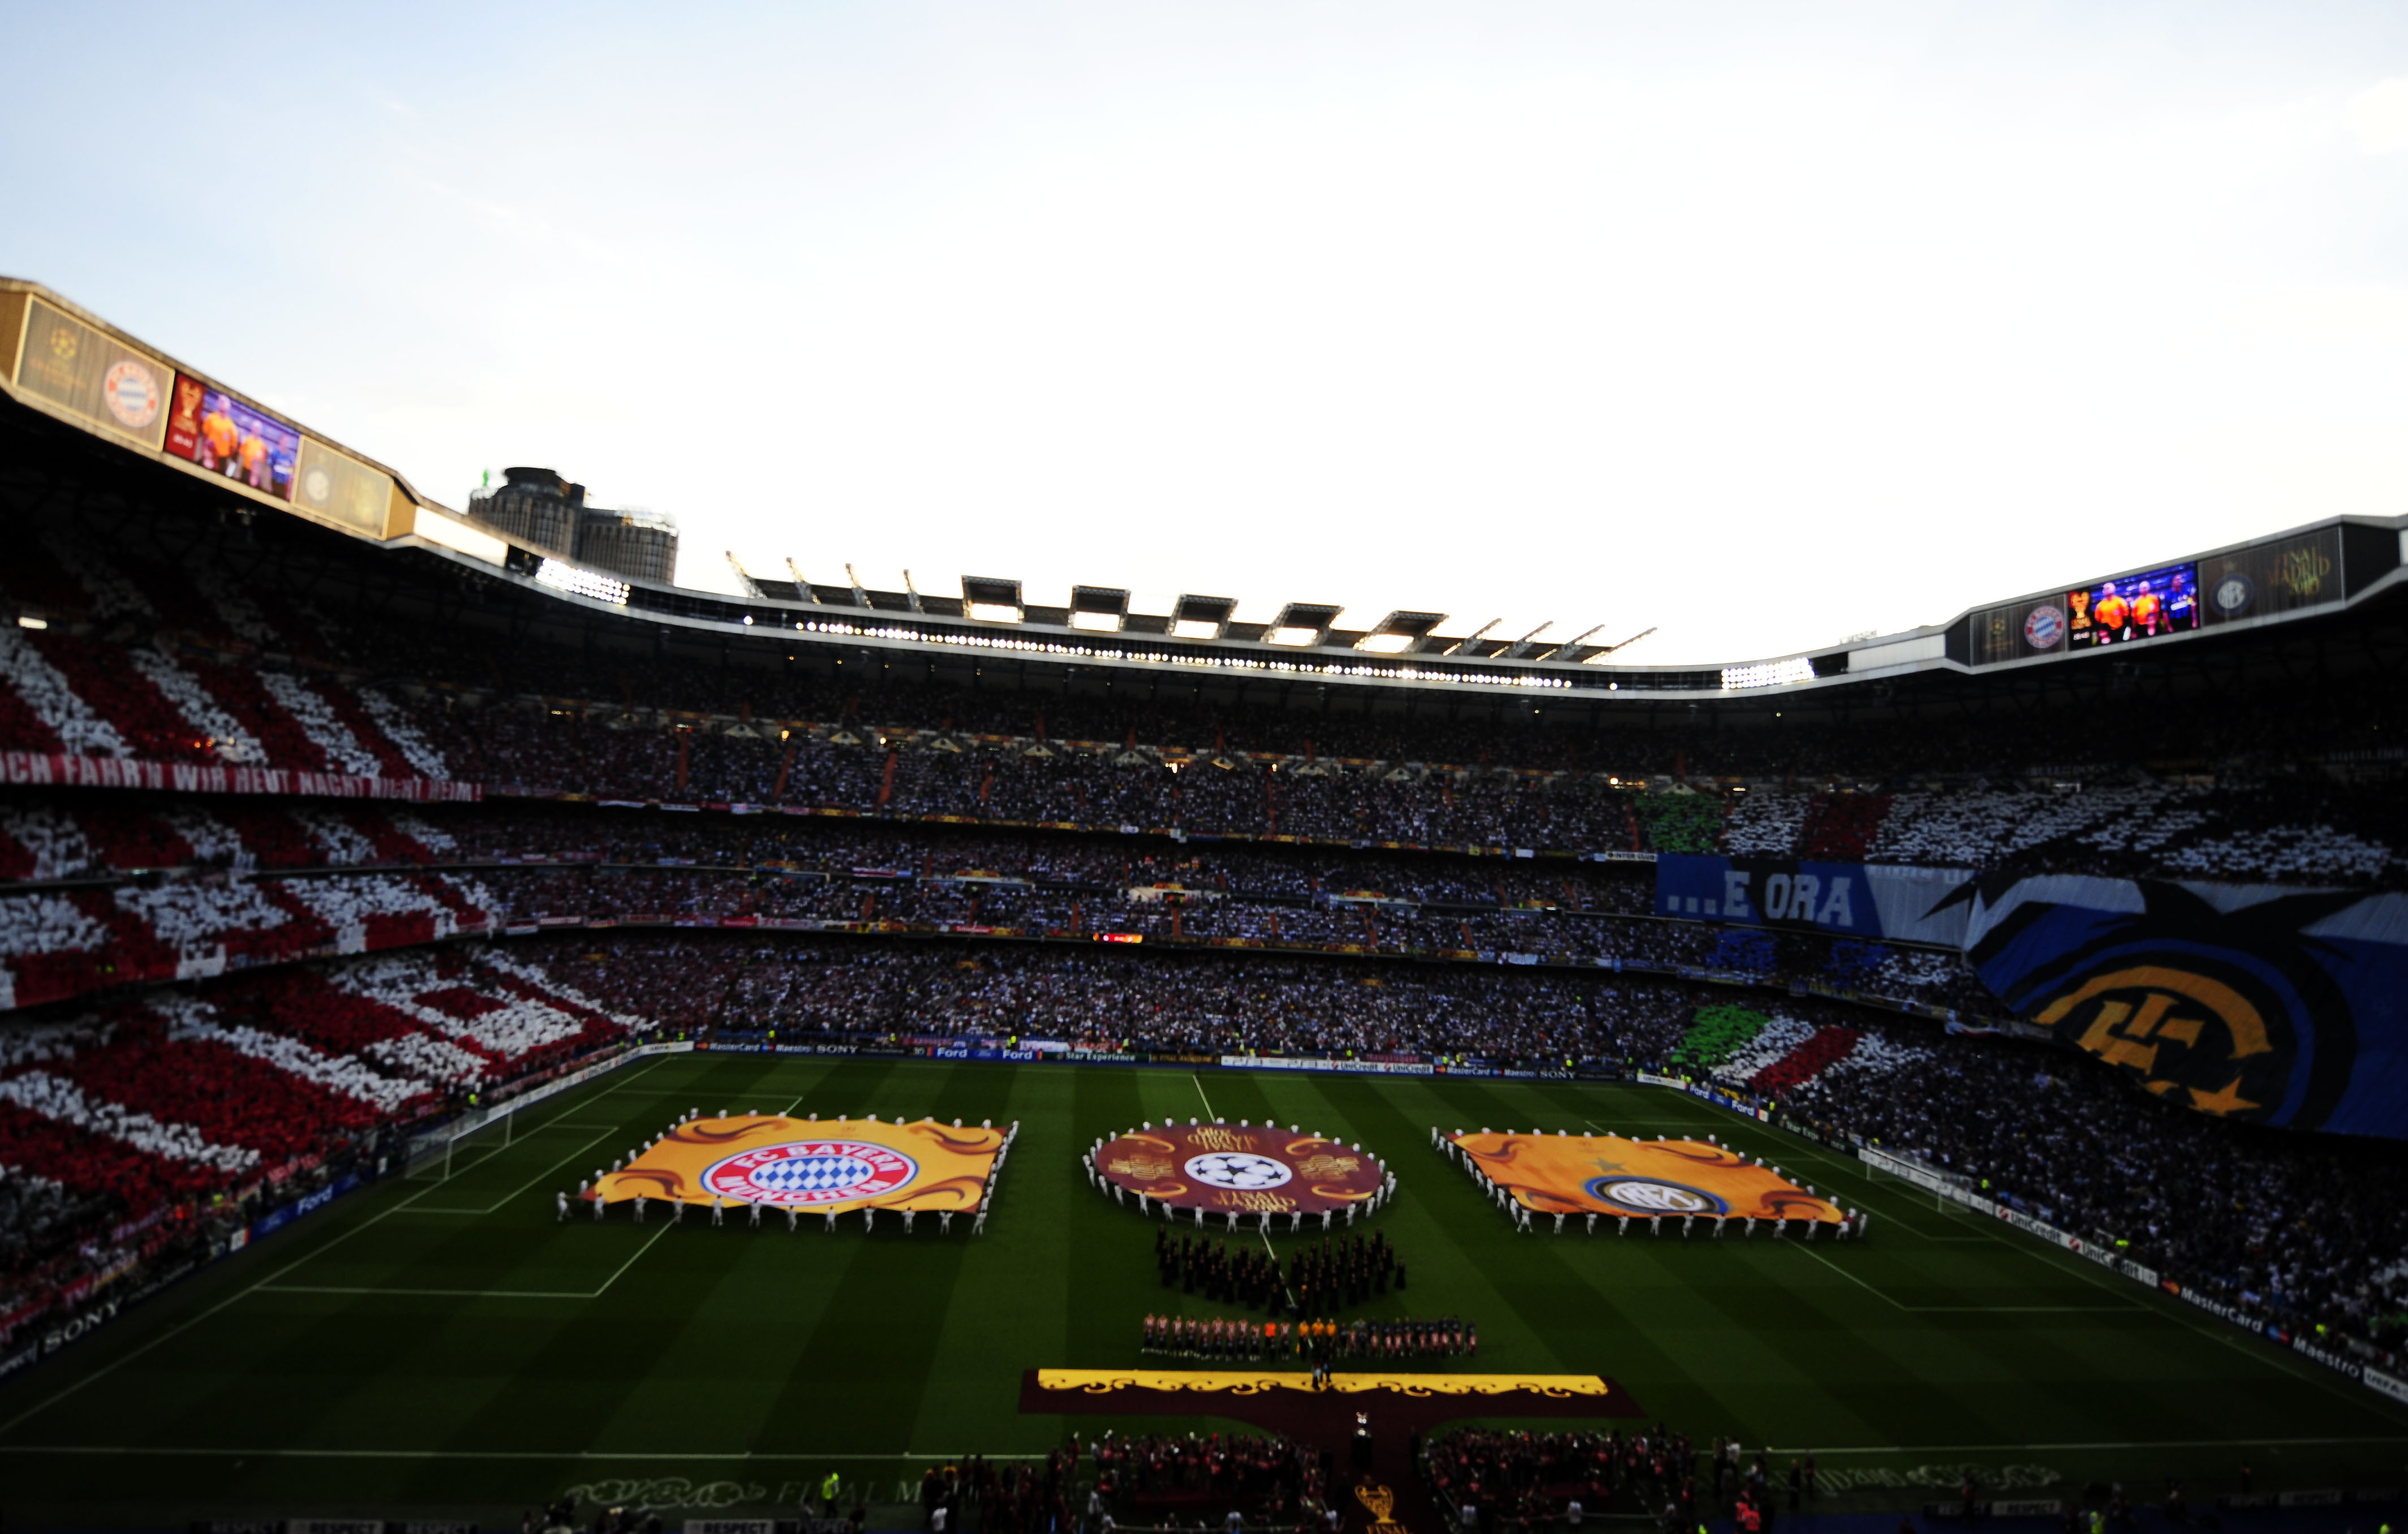 MADRID, SPAIN - MAY 22: A general view ahead of the UEFA Champions League Final match between FC Bayern Muenchen and Inter Milan at the Estadio Santiago Bernabeu on May 22, 2010 in Madrid, Spain.  (Photo by Jamie McDonald/Getty Images)